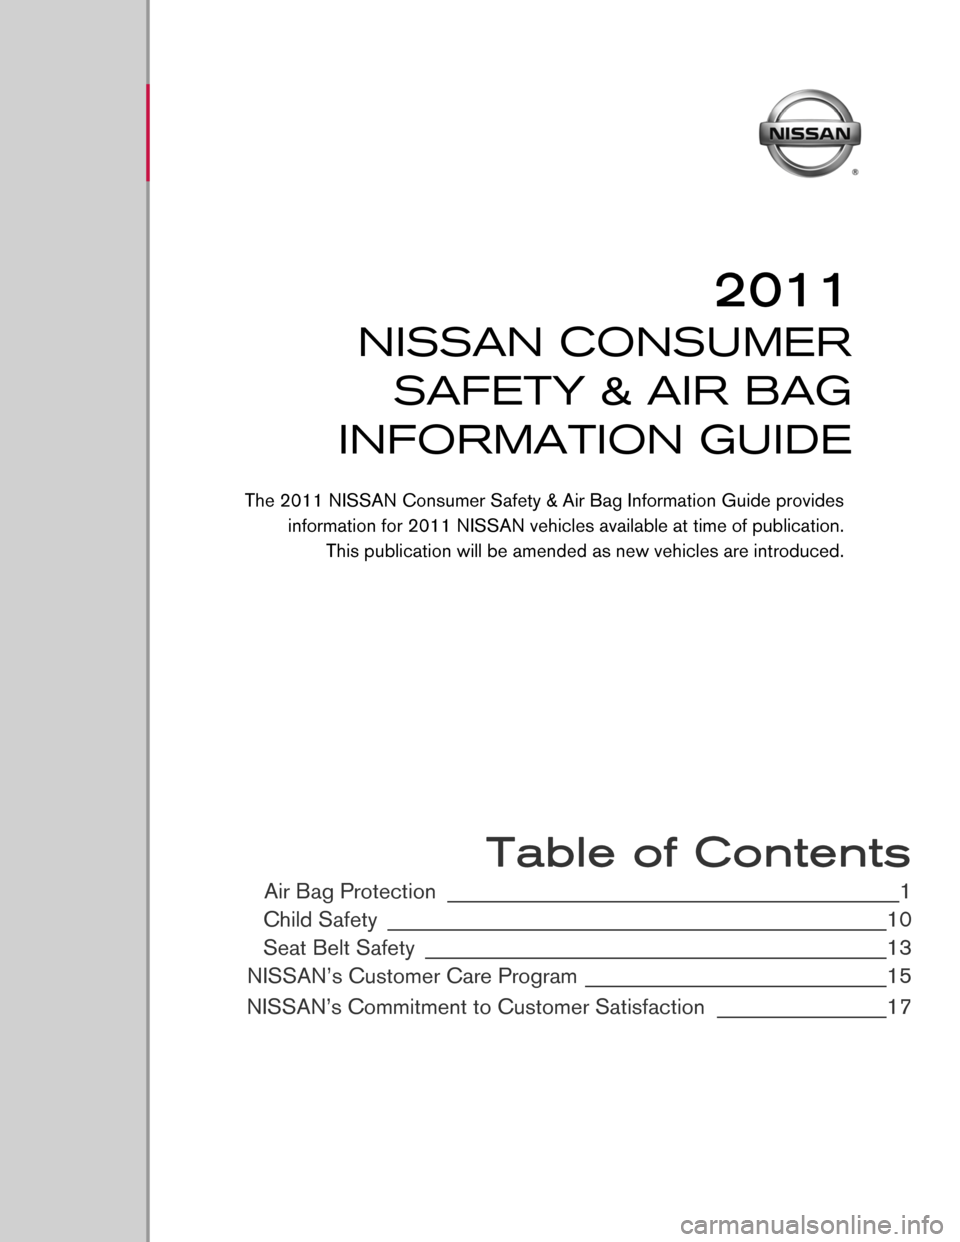 NISSAN VERSA 2011 1.G Consumer Safety Air Bag Information Guide  
 
 
 
 
 
 
 
 
 
 
 
 
 
 
 
 
 
 
 
 
 
 
 Table of Contents
Air Bag Protection ________________________________________________1
Child Safety
 ____________________________________________________